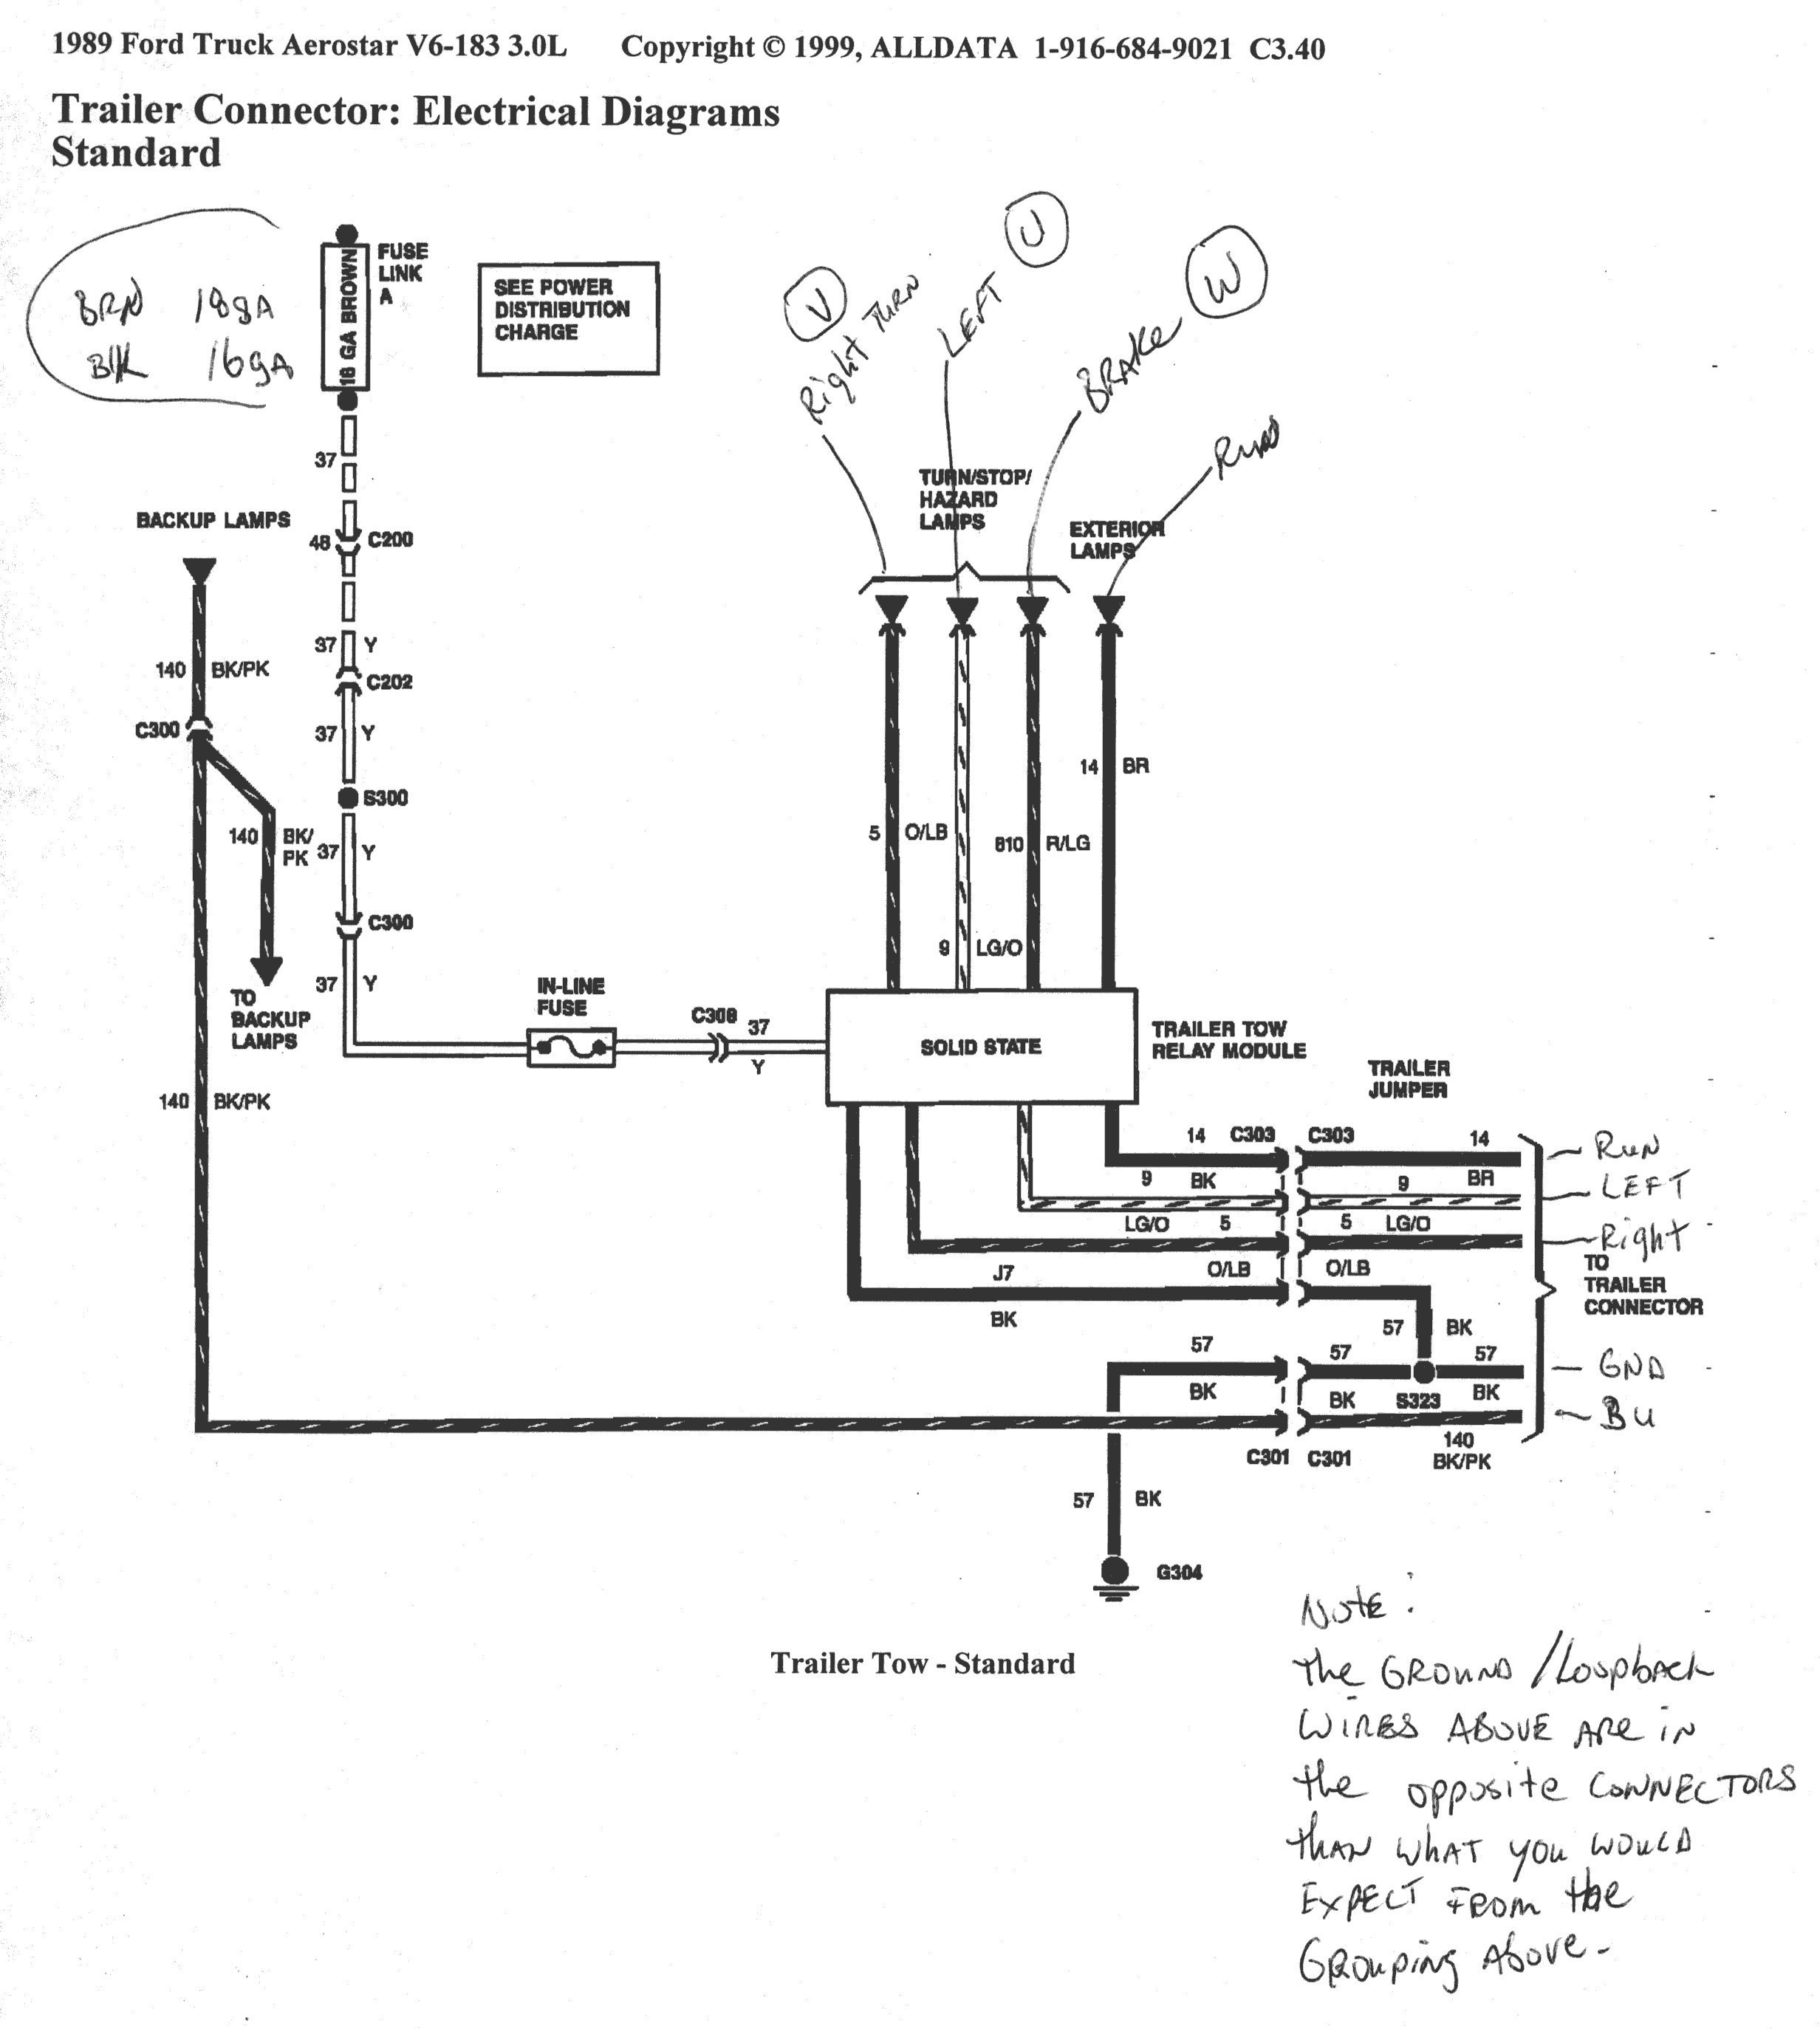 1987 Ford F350 Wiring Diagram from mainetreasurechest.com